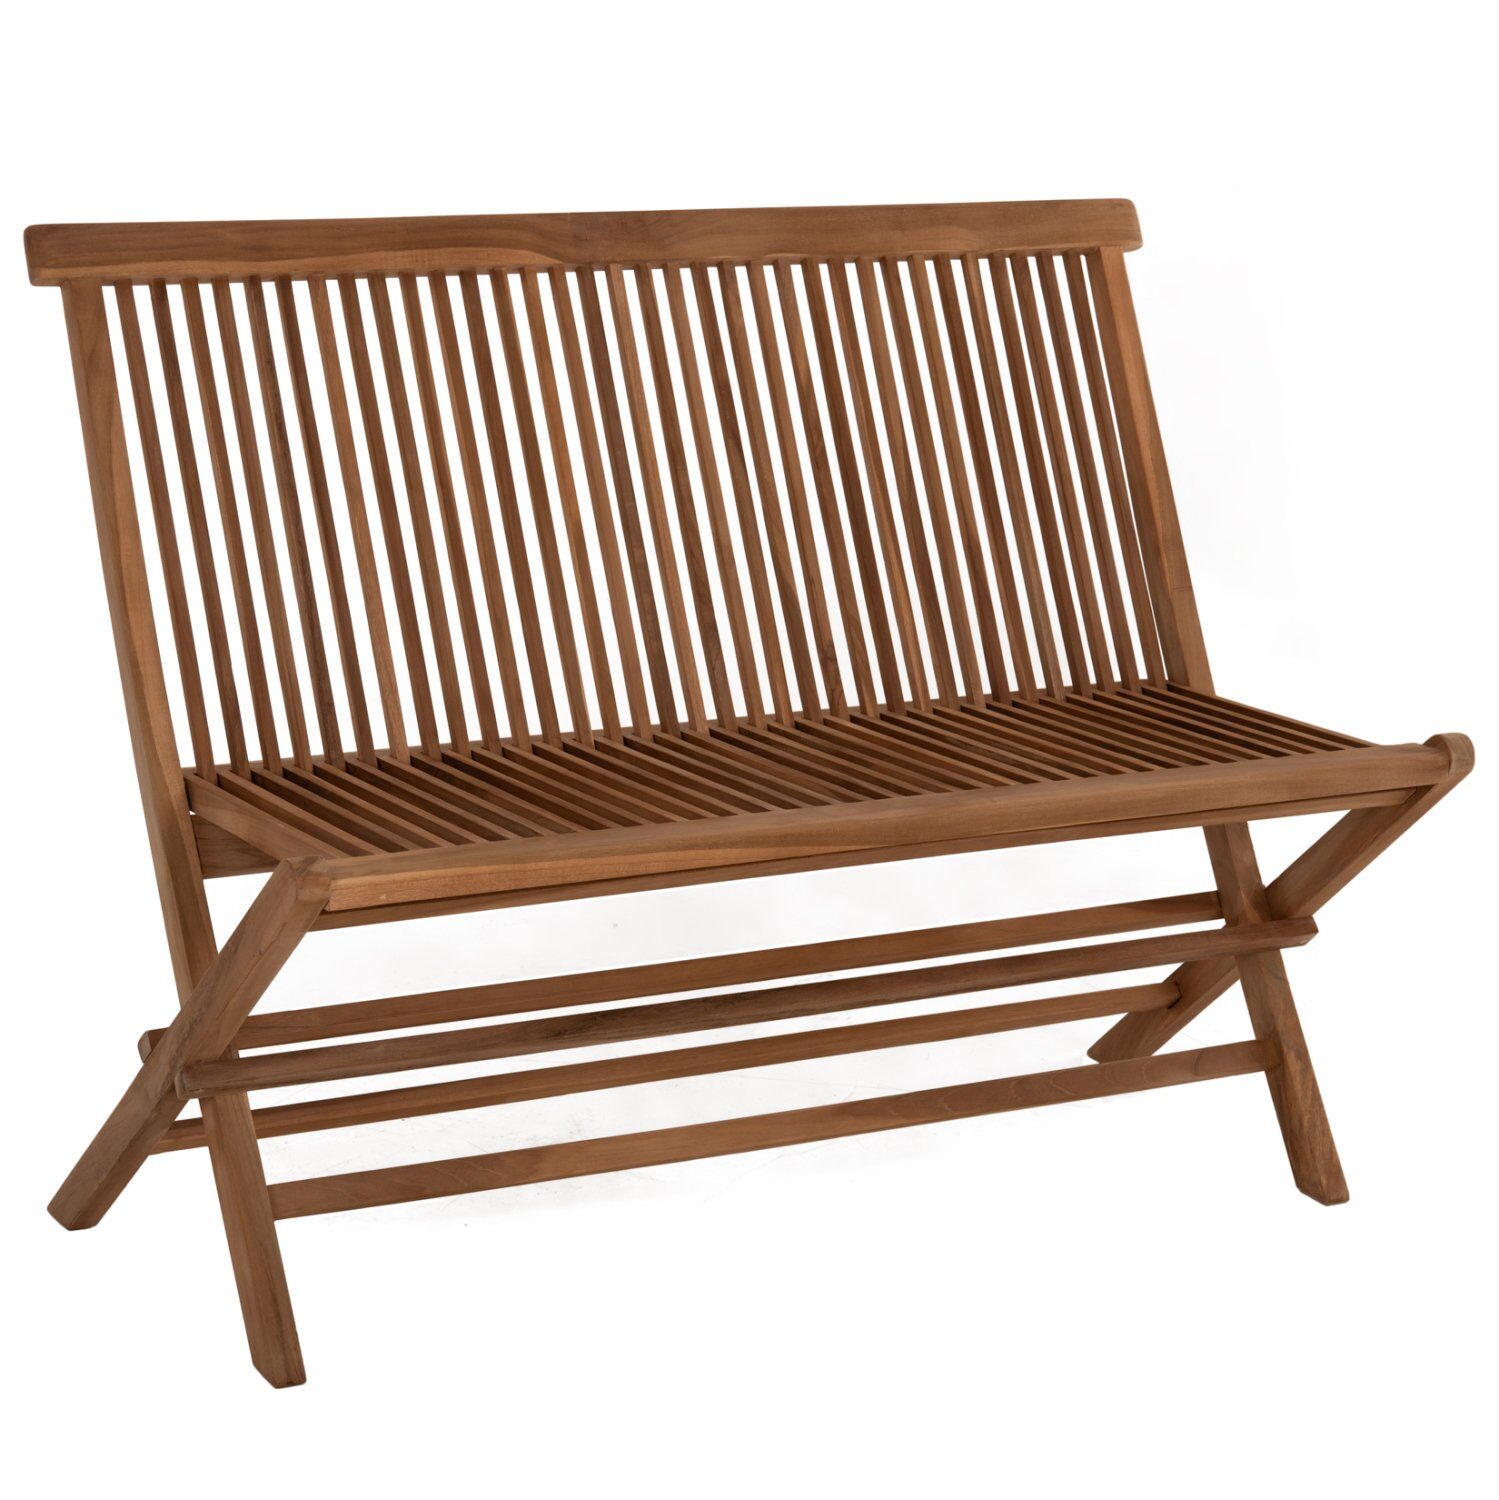 BENCH KENDALL HM9541 FOLDABLE MADE OF TEAK WOOD IN NATURAL COLOR 120x62x89Hcm.